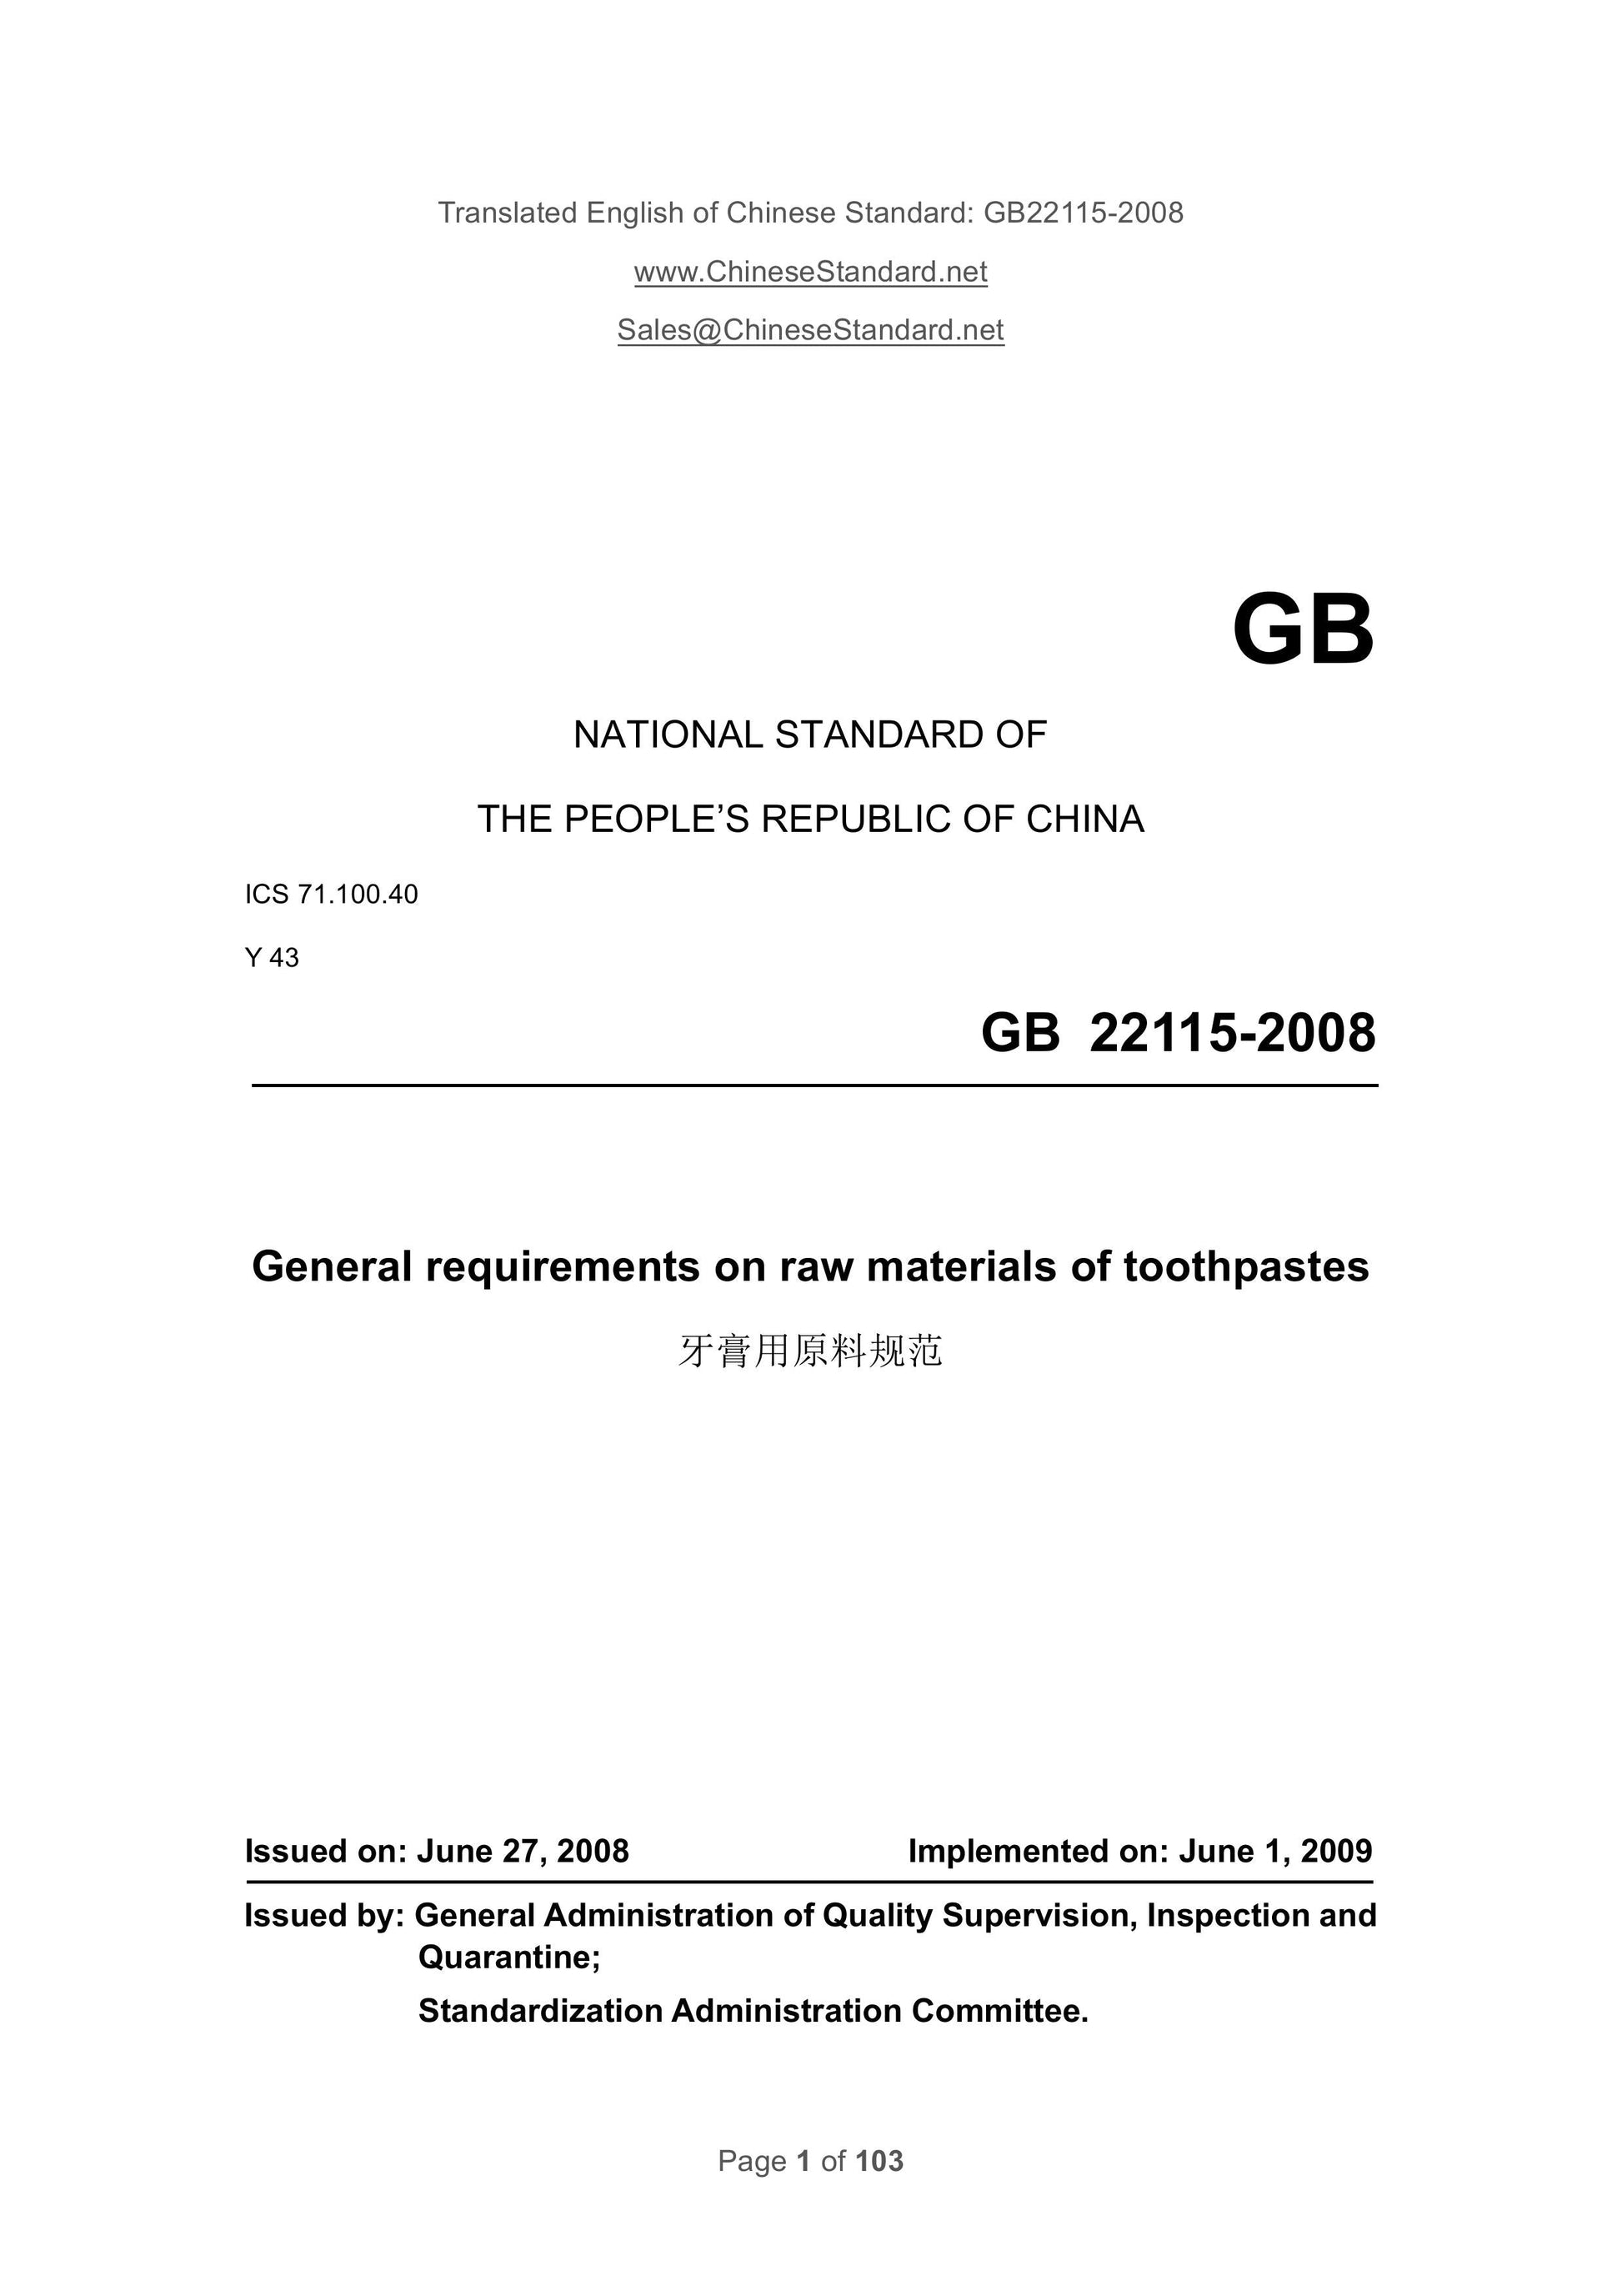 GB 22115-2008 Page 1